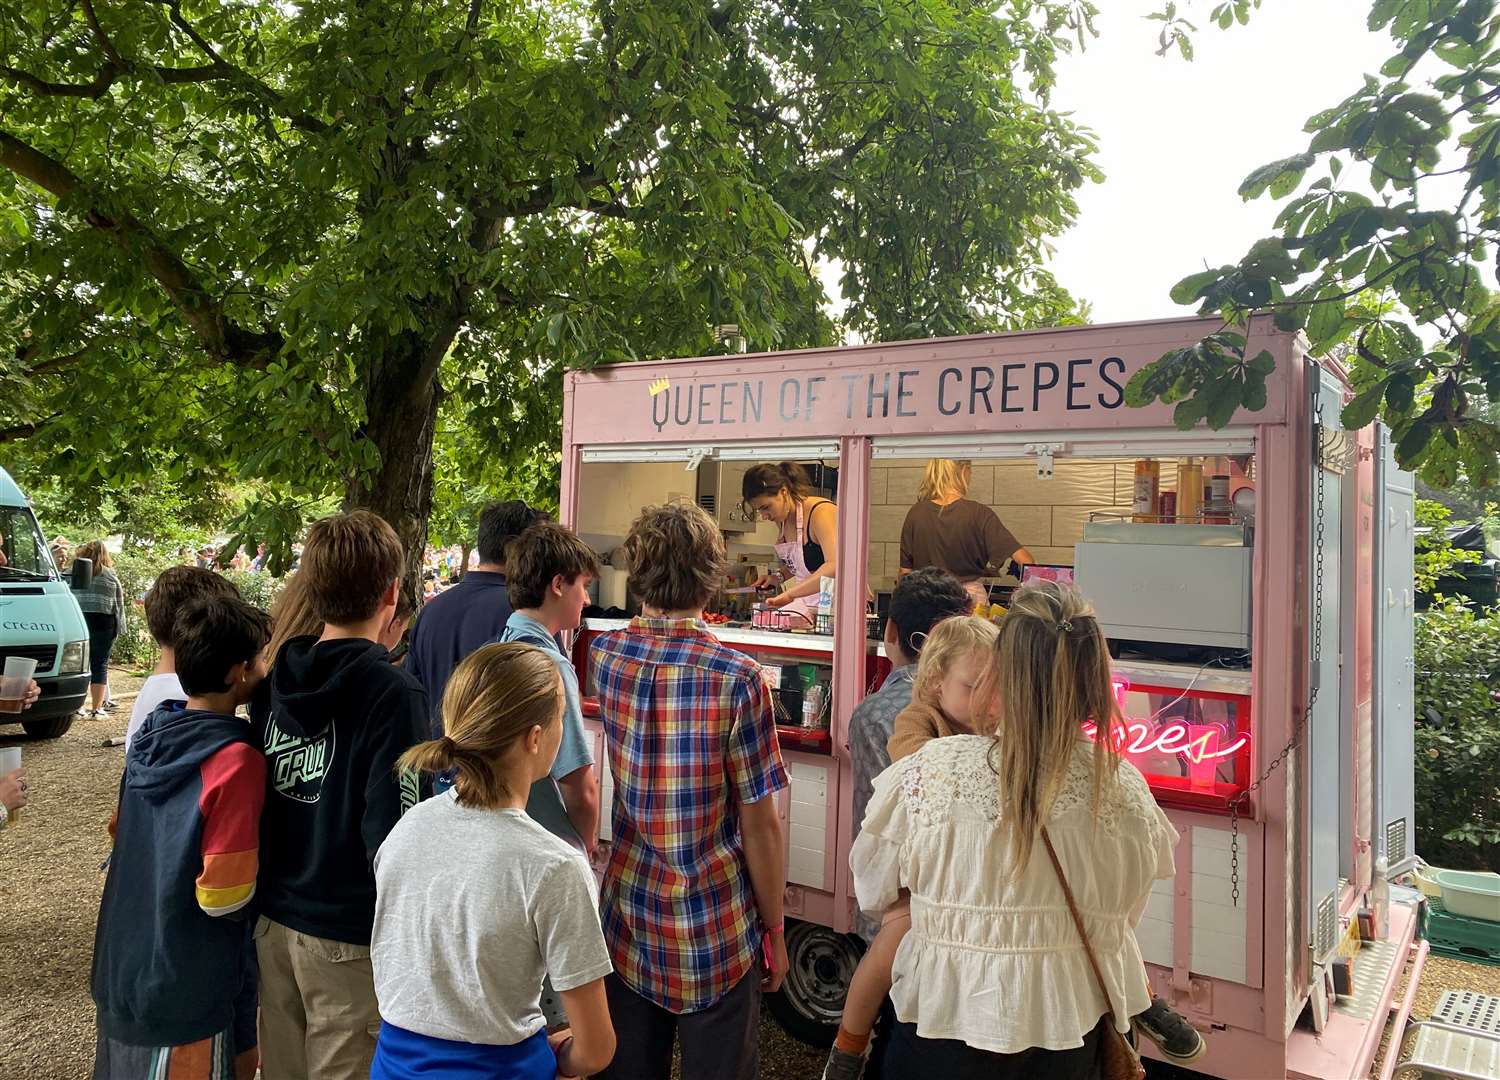 Queen of the Crepes had one of the longest lines among food vendors at the Smoked & Uncut Festival in Bridge, near Canterbury